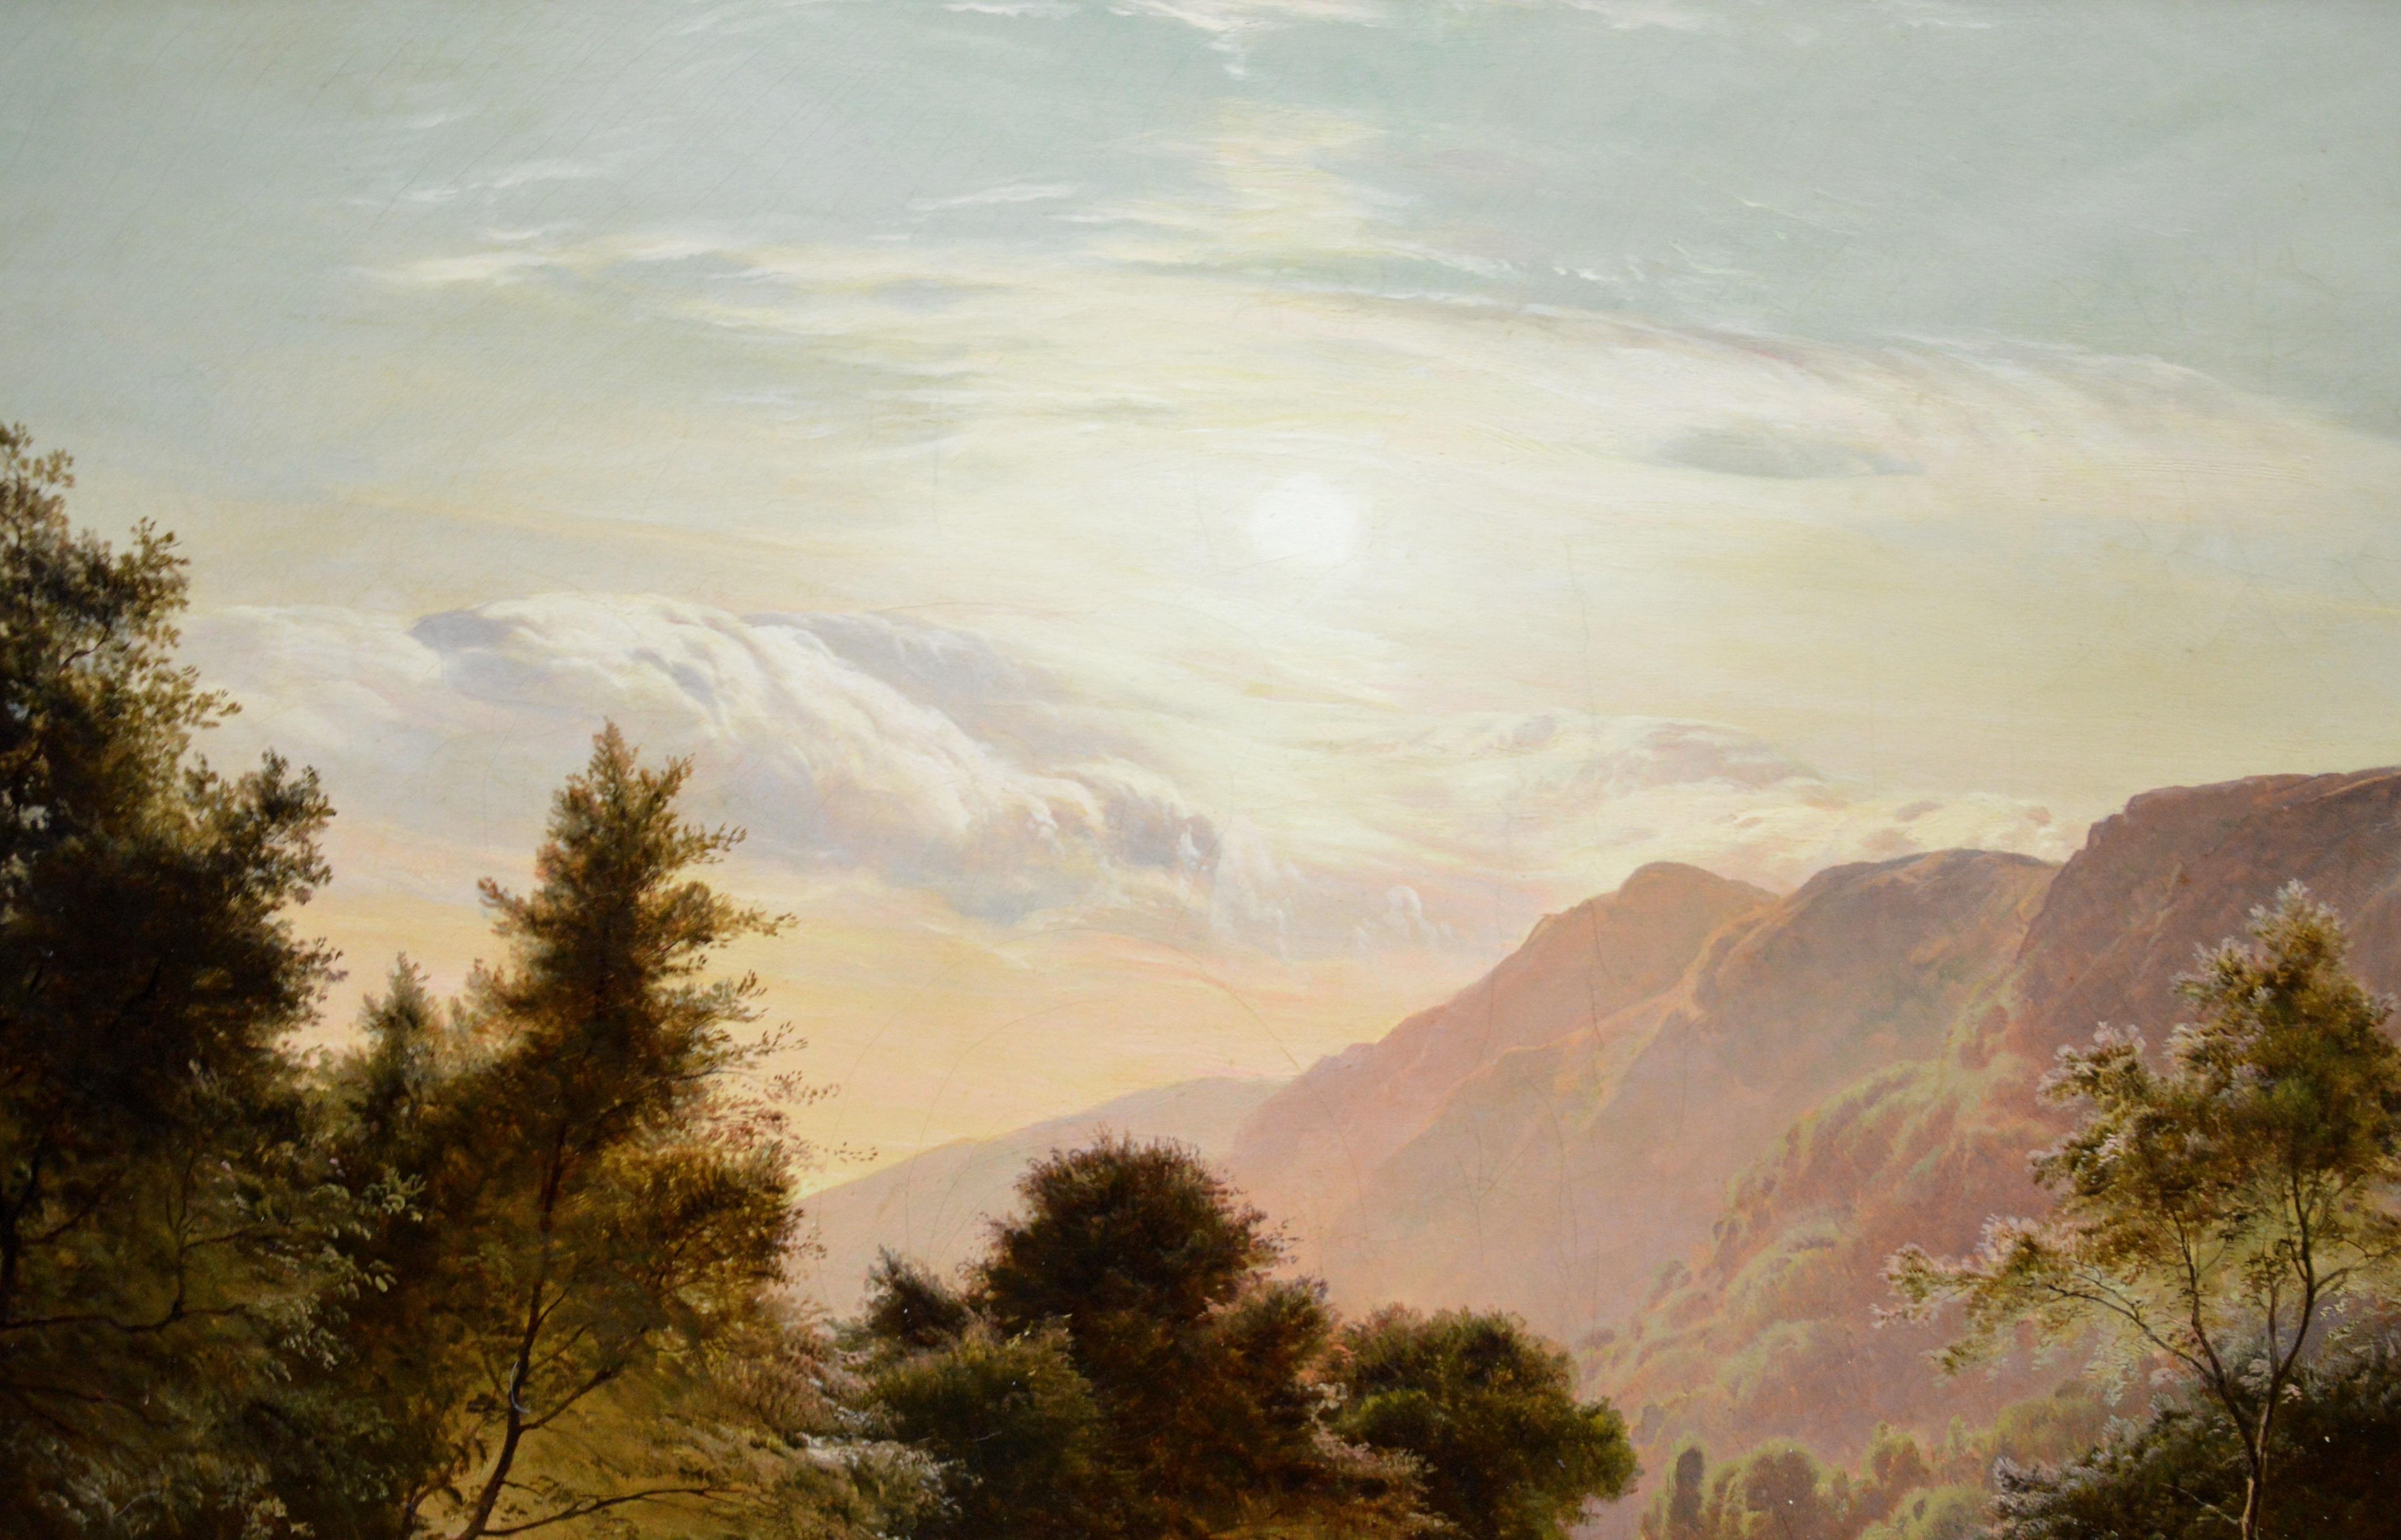 Cnich from the Glaslyn, North Wales - Large 19th Century Landscape Oil Painting  - Brown Landscape Painting by Sidney Richard Percy